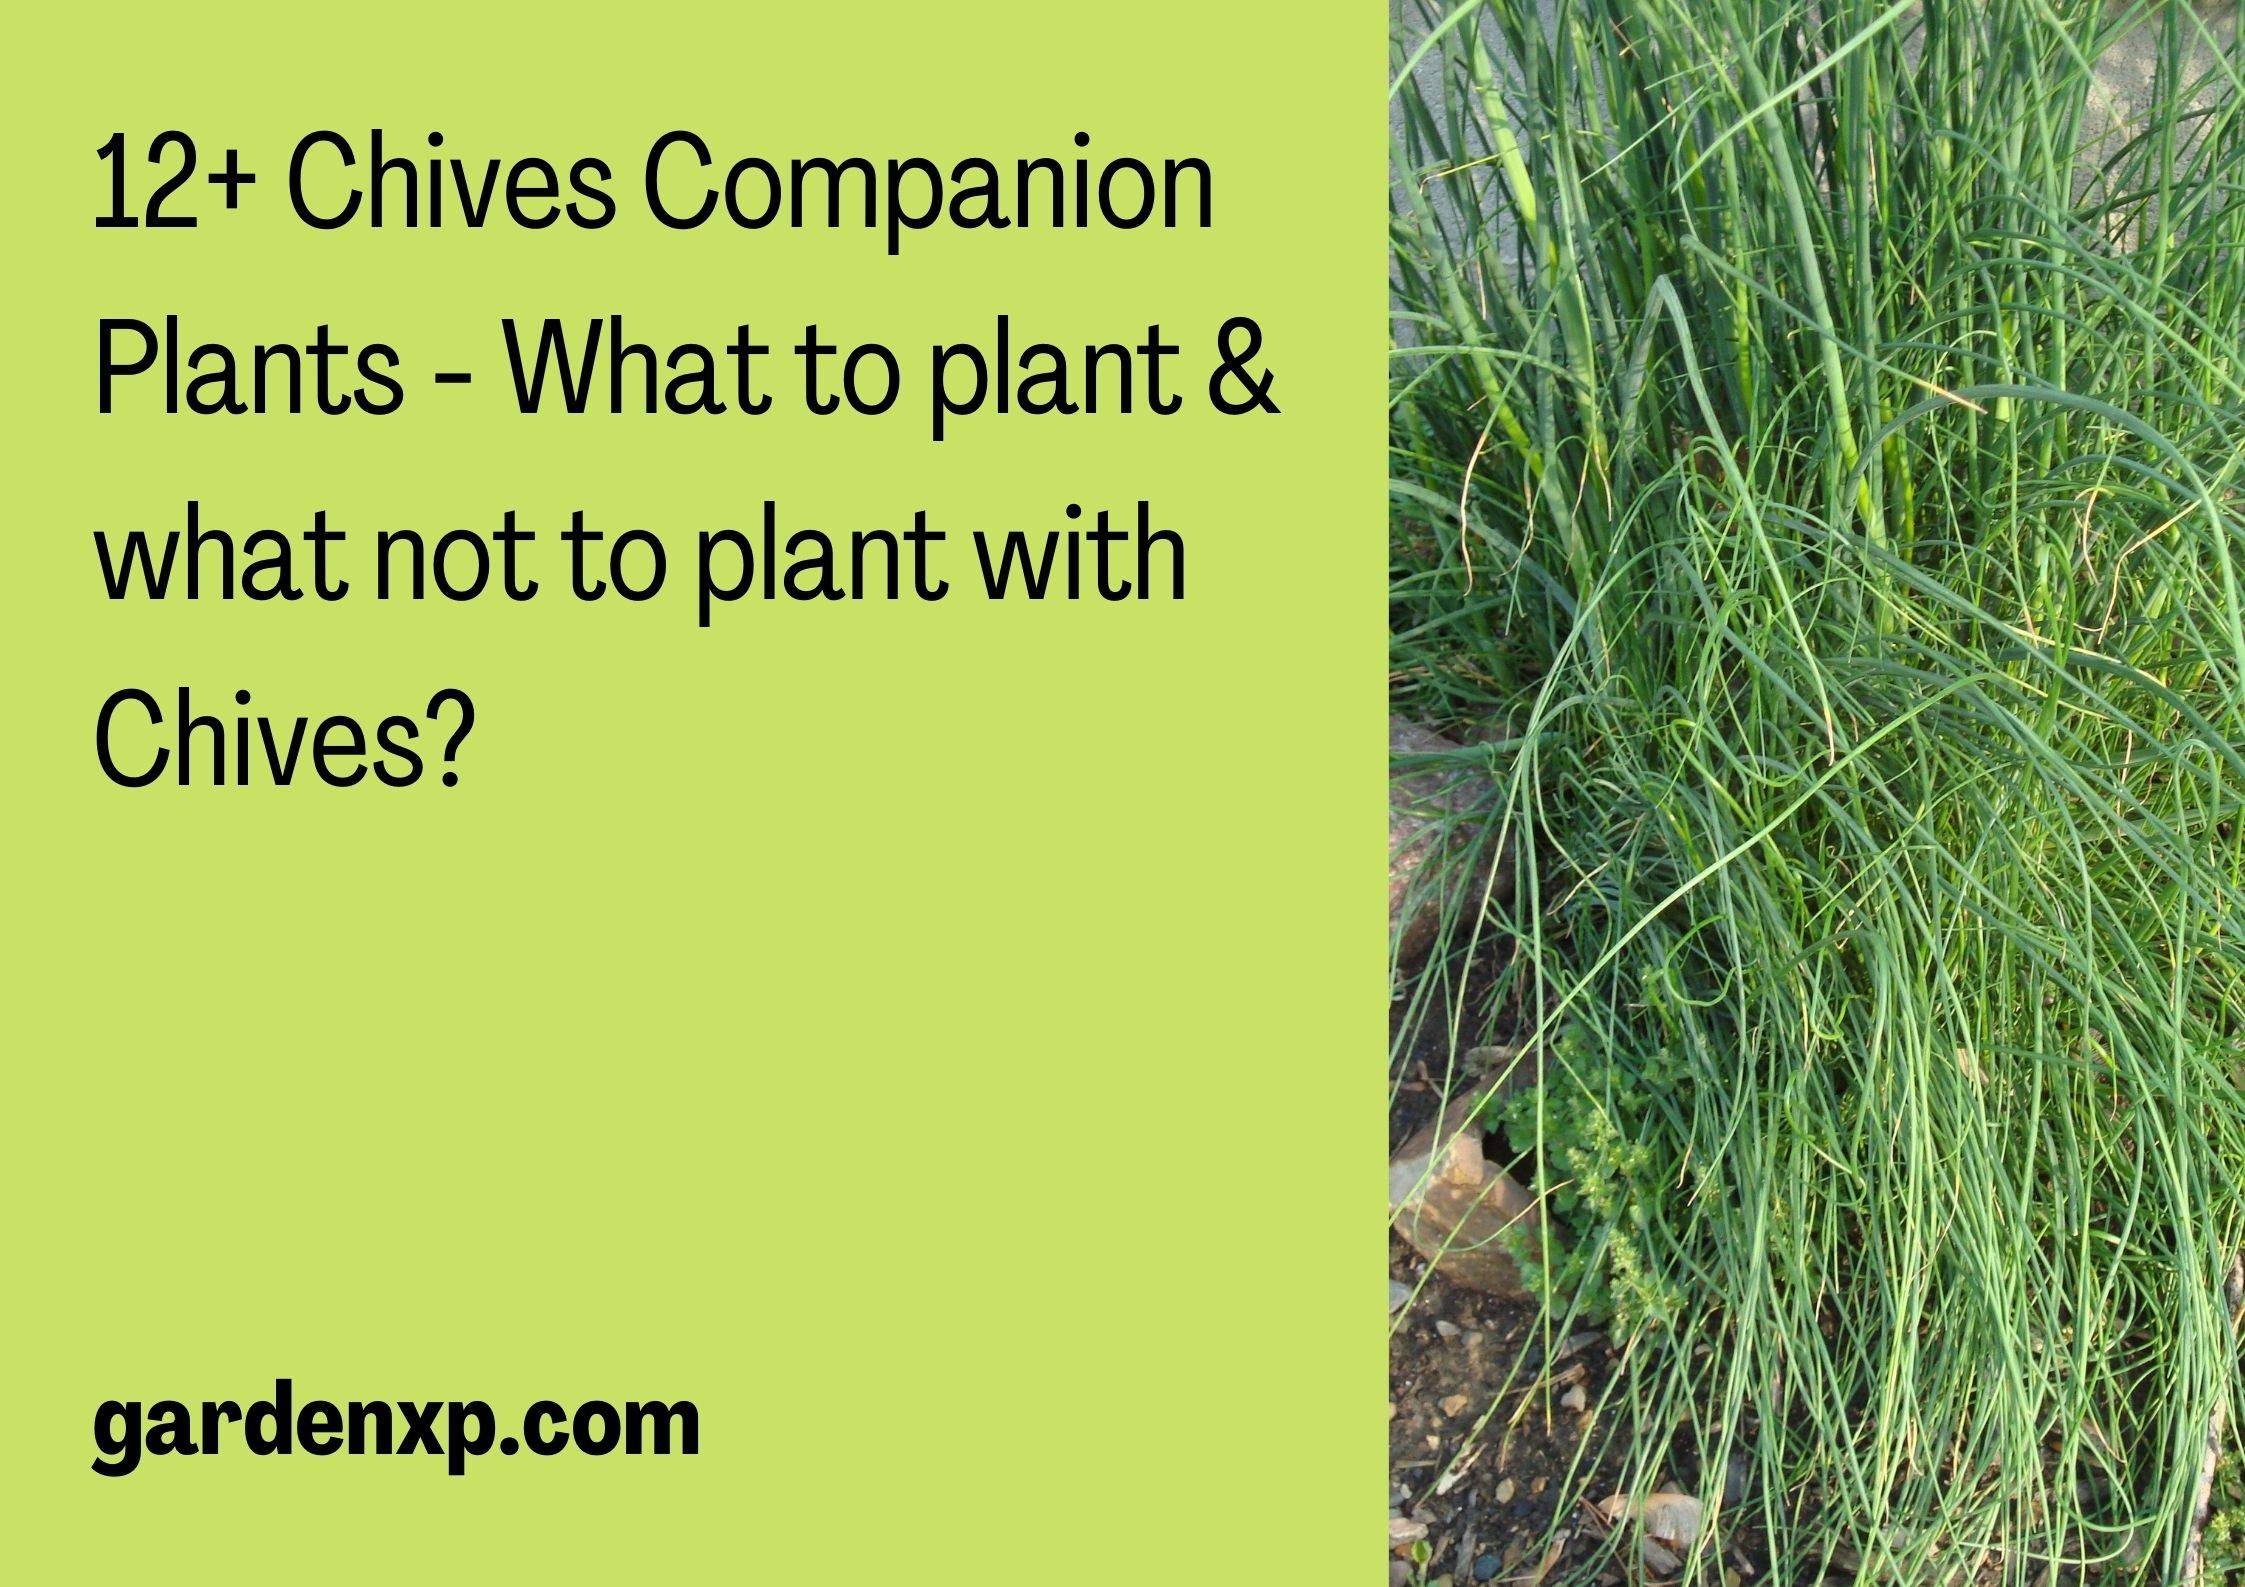 12+ Chives Companion Plants - What to plant & what not to plant with Chives?